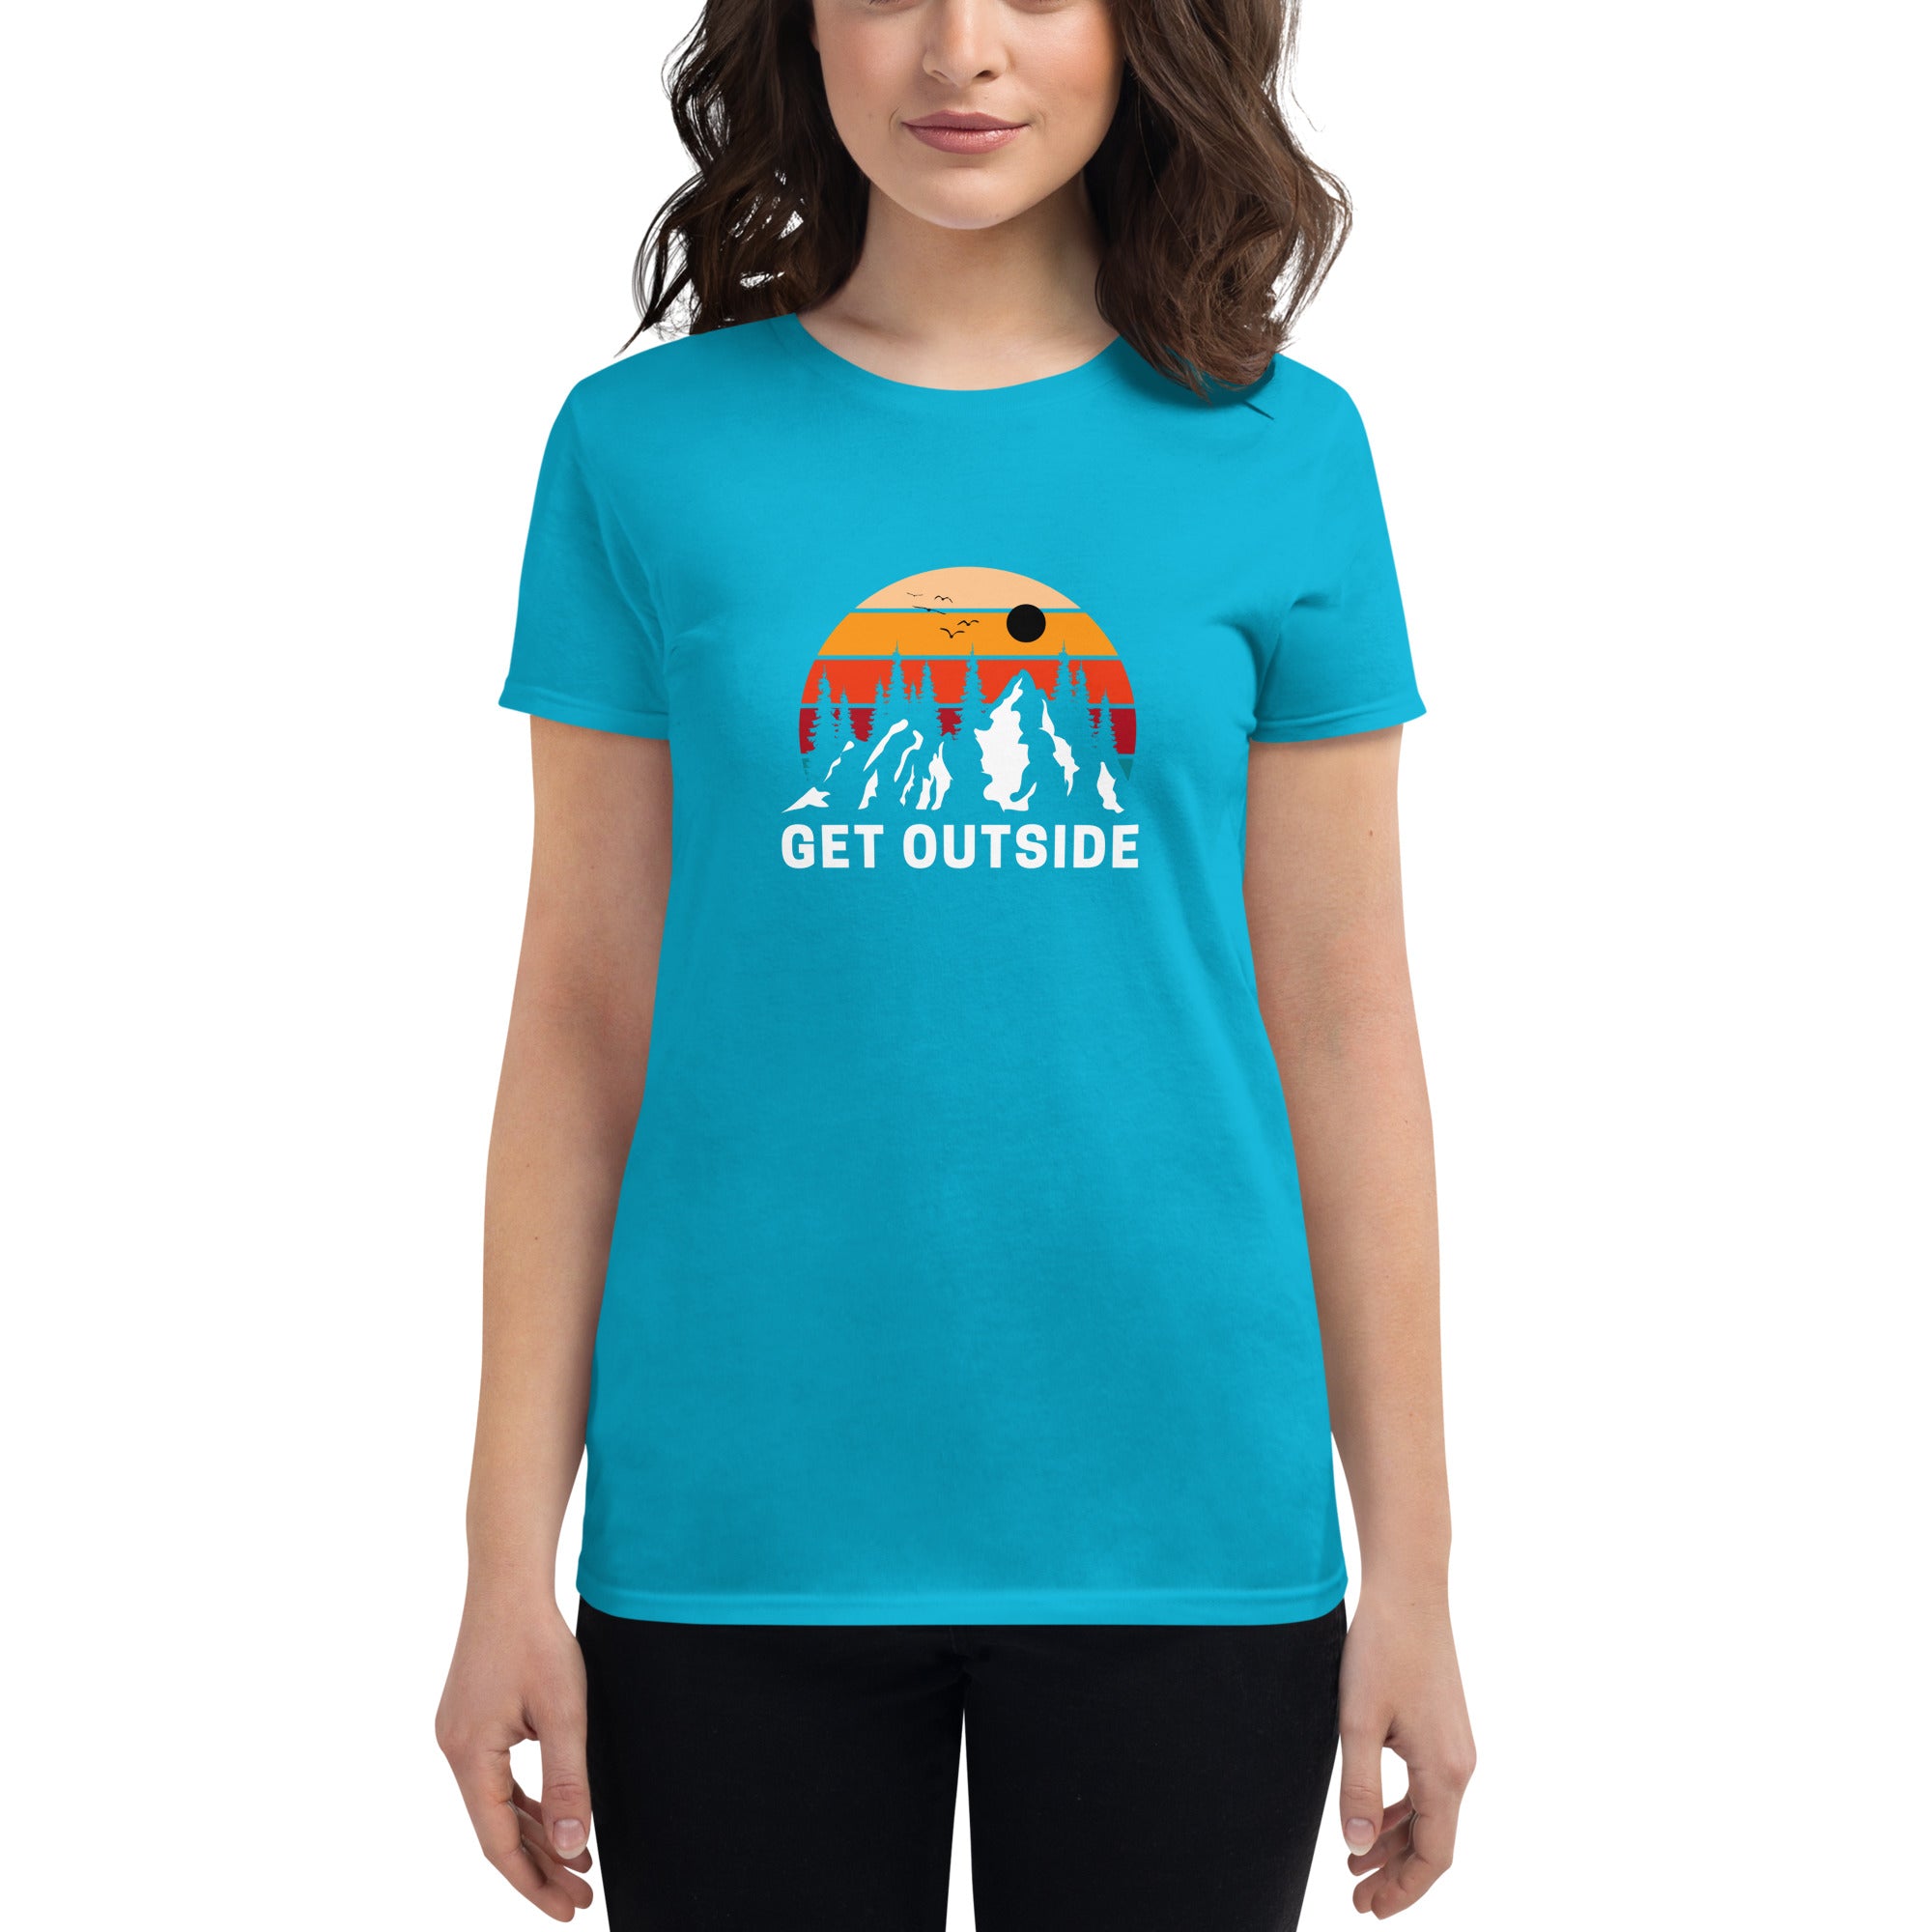 Get Outside Women's Fitted T-Shirt